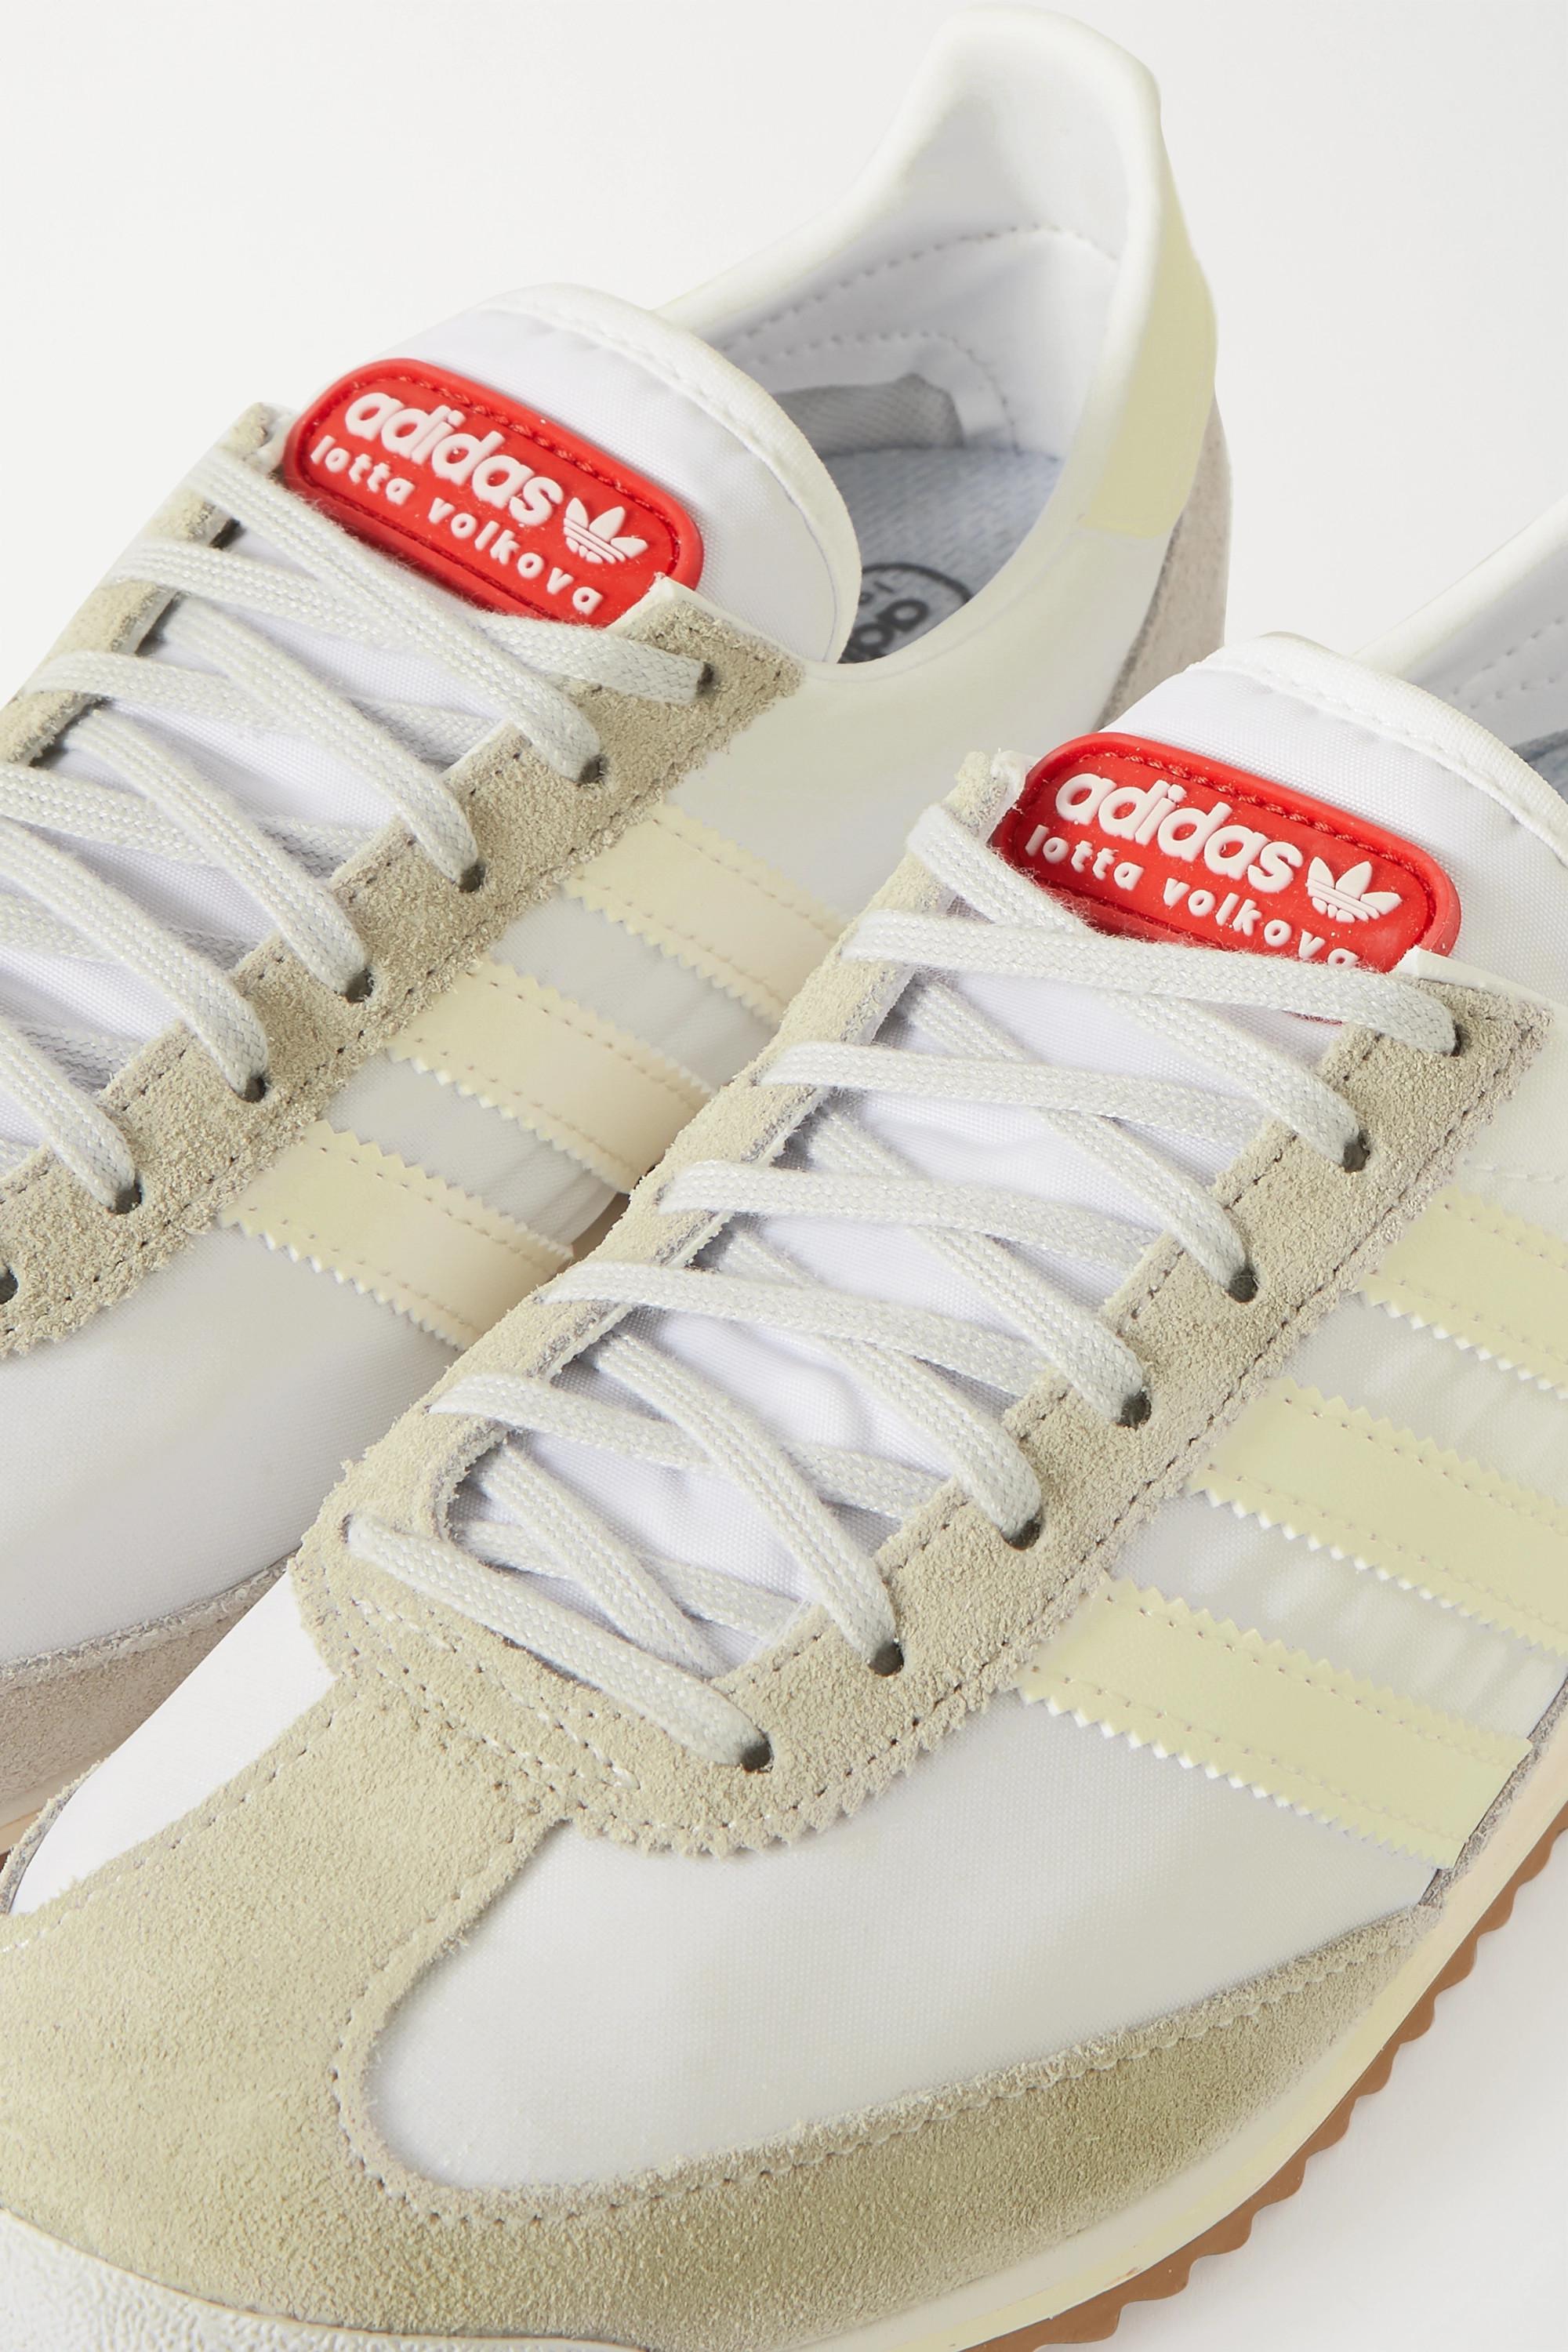 Arbejdsgiver Afslut Forbløffe adidas Originals Lotta Volkova Sl 72 Shell, Leather And Suede Sneakers in  White | Lyst UK